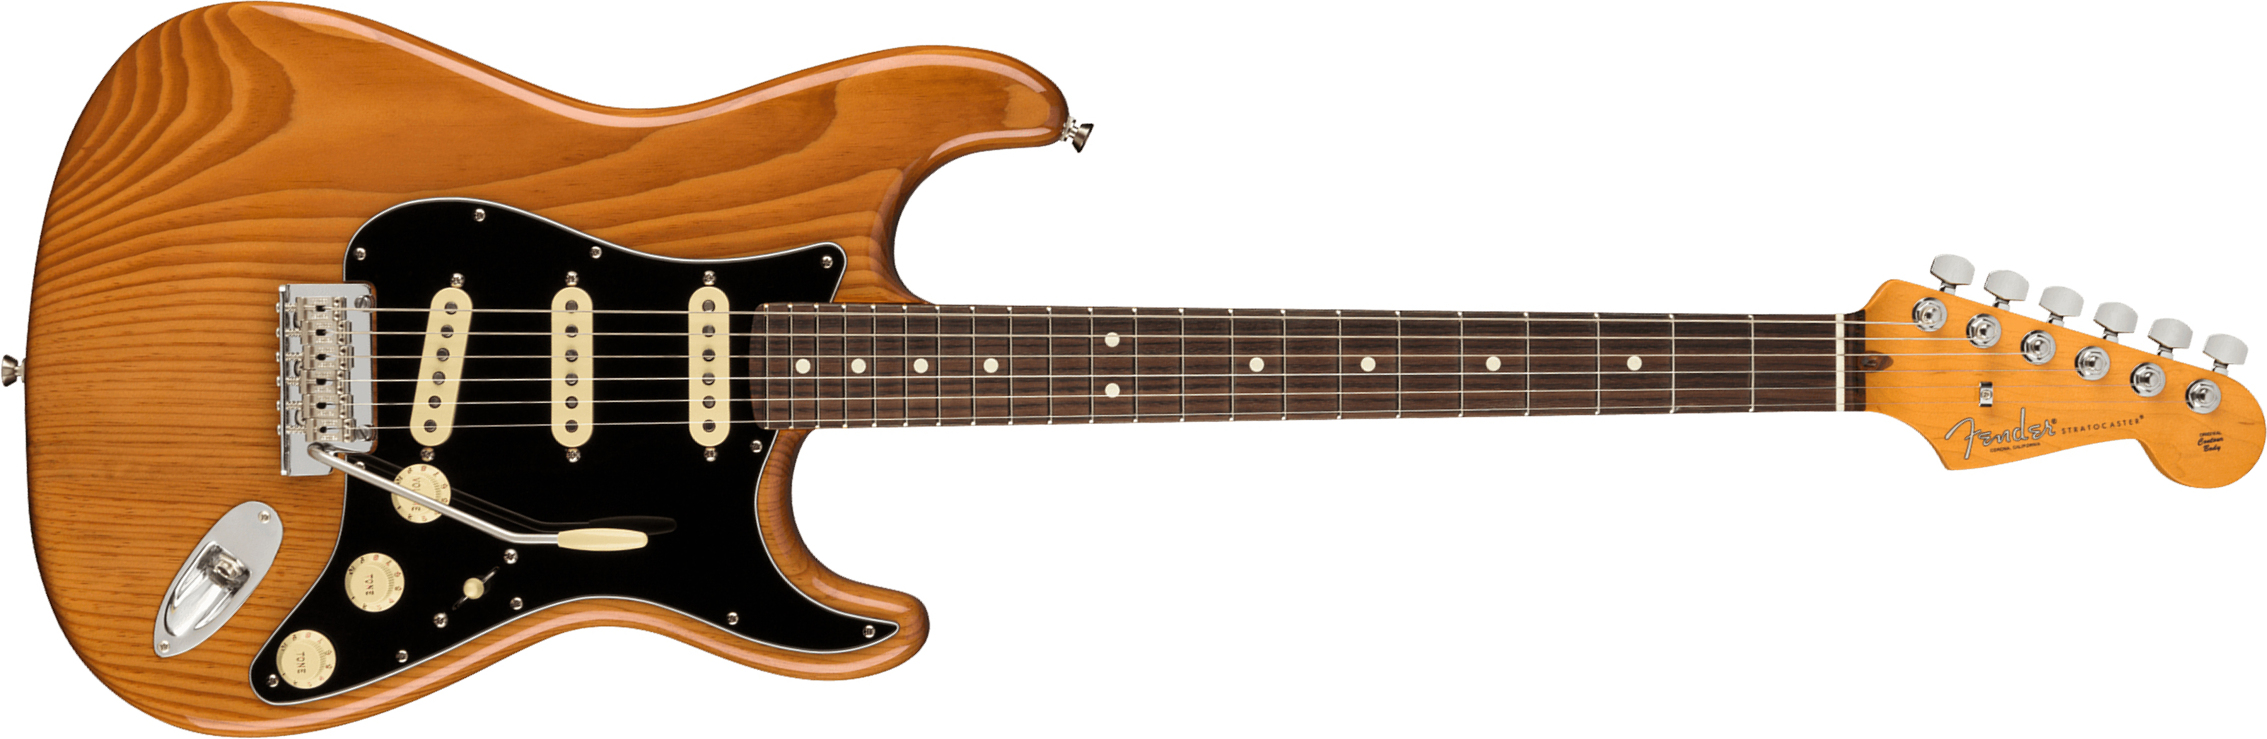 Fender Strat American Professional Ii Usa Rw - Roasted Pine - Str shape electric guitar - Main picture